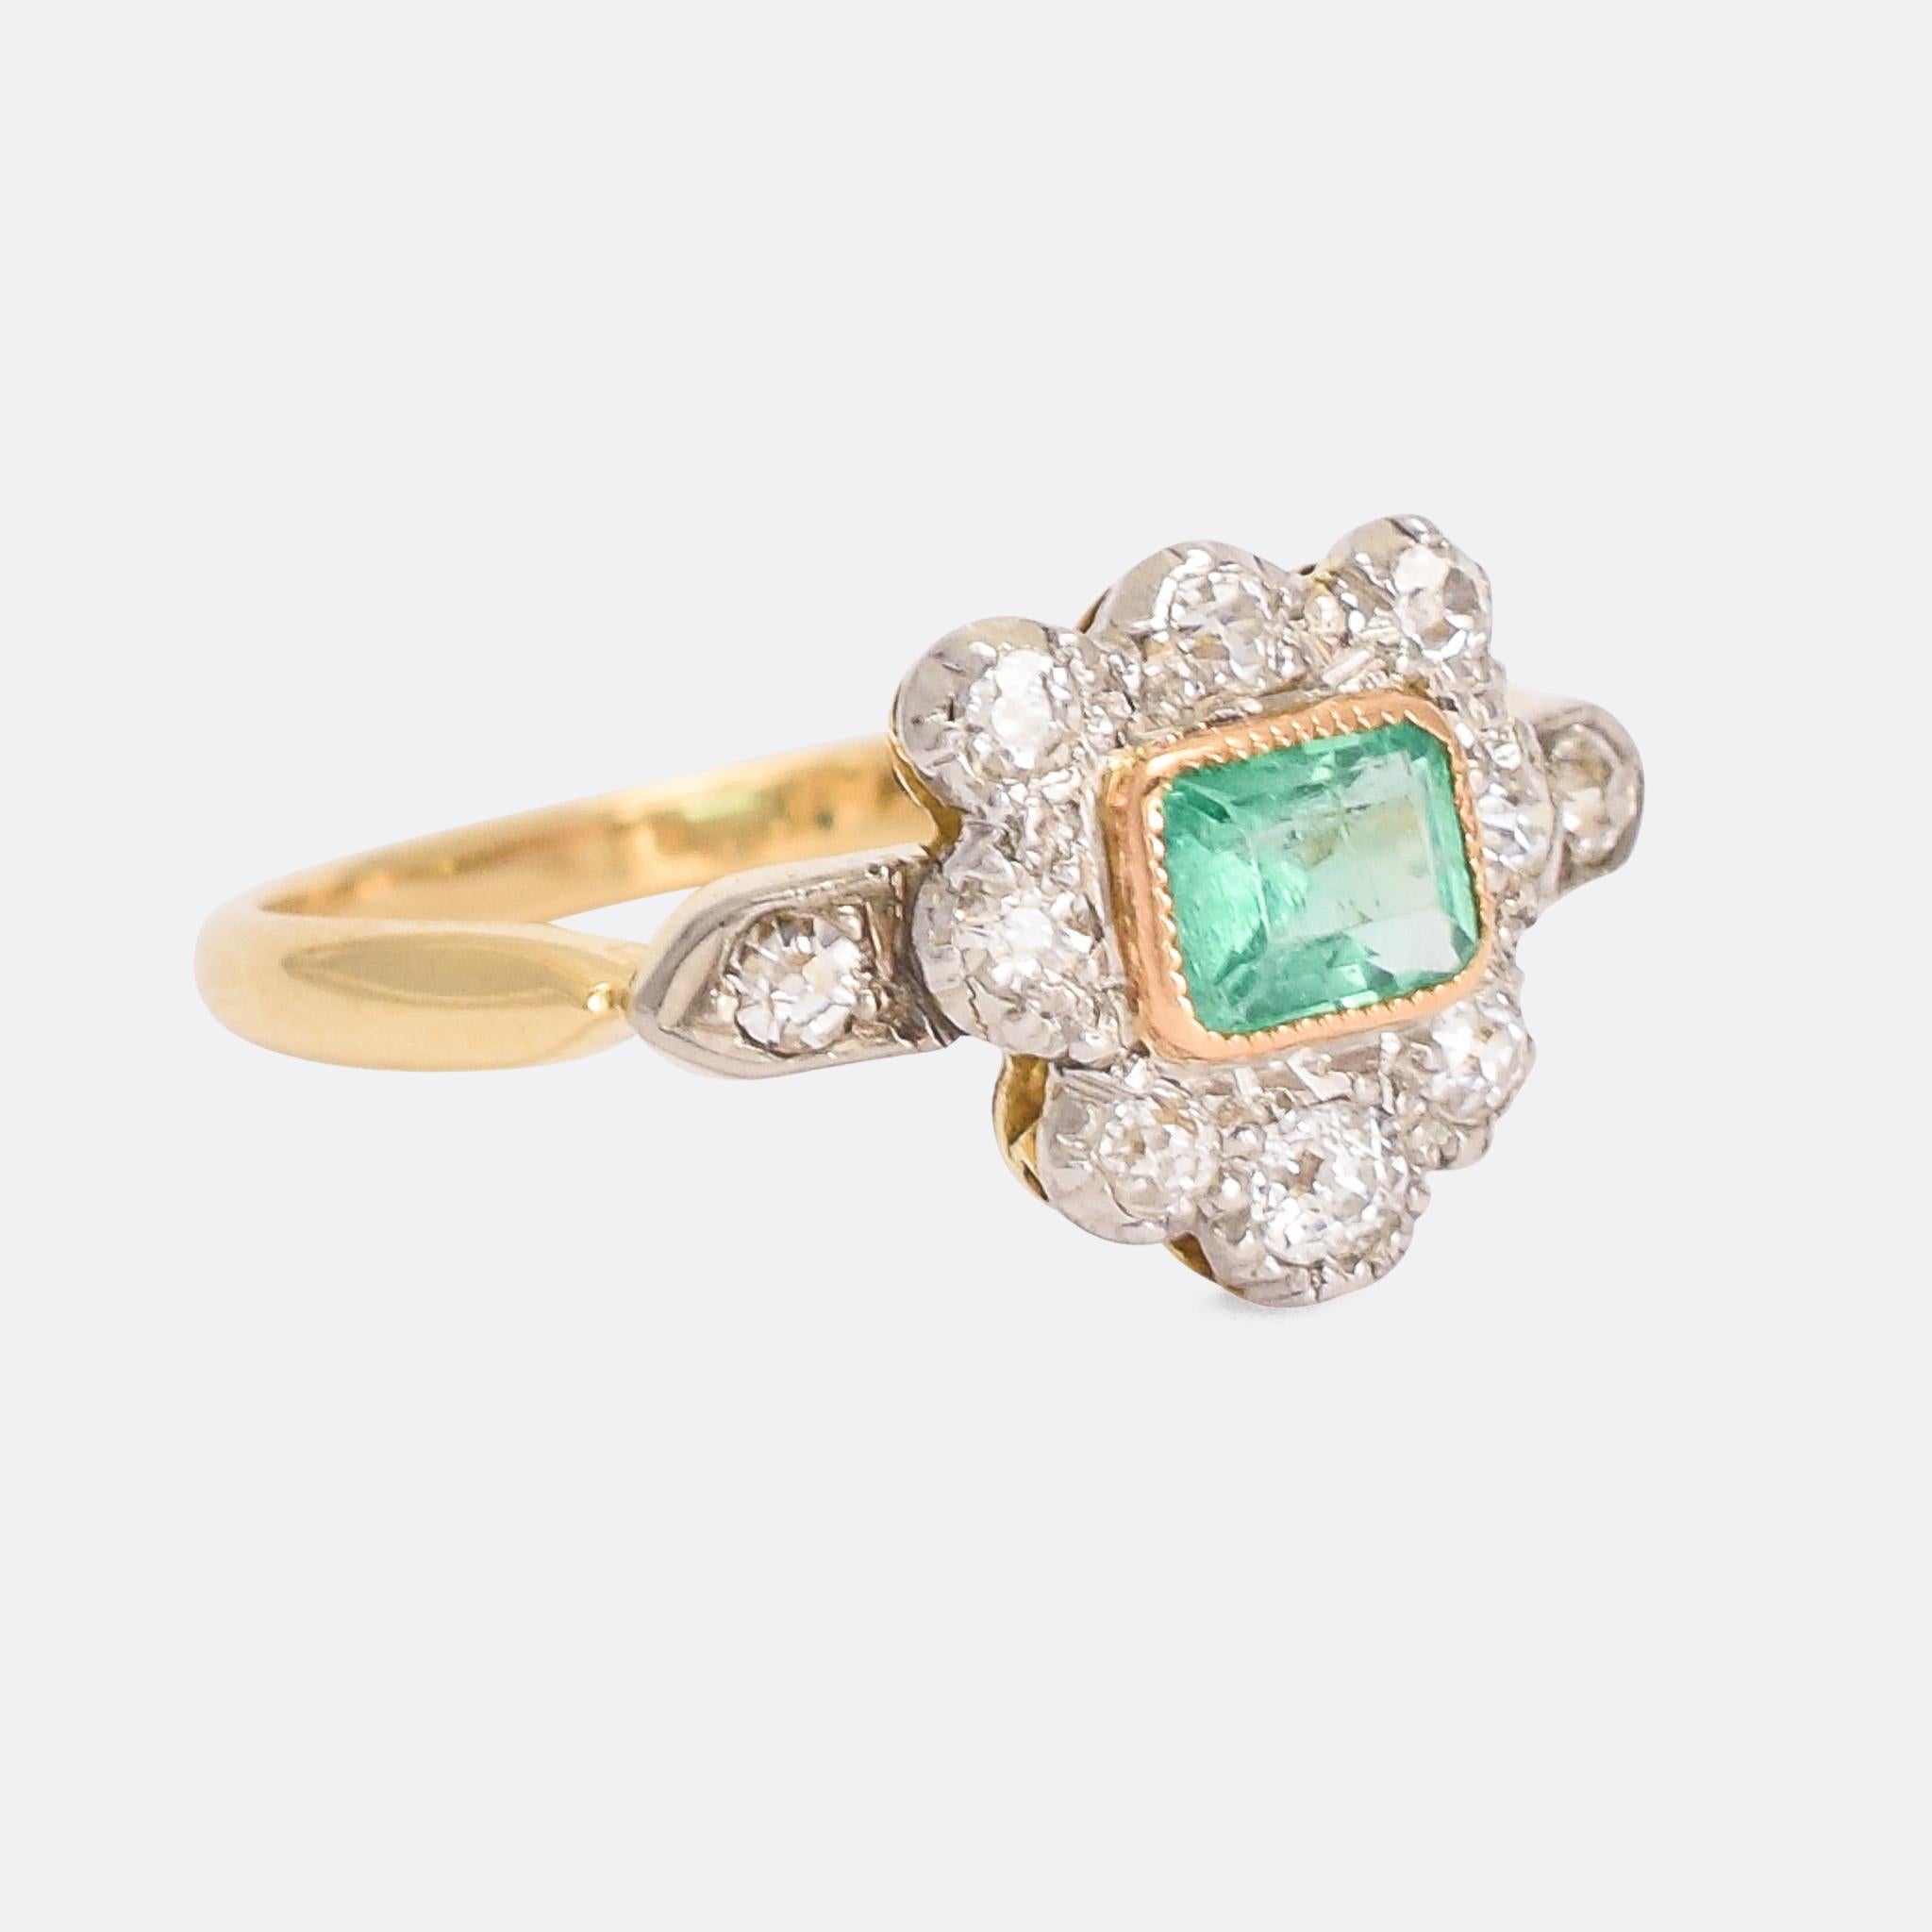 A highly unusual antique cluster ring dating from the late Victorian era. The head is a shield (or heart?) shape, and set with old cut diamonds around a central emerald. Very strange to see an asymetrical cluster ring from this period, but it's